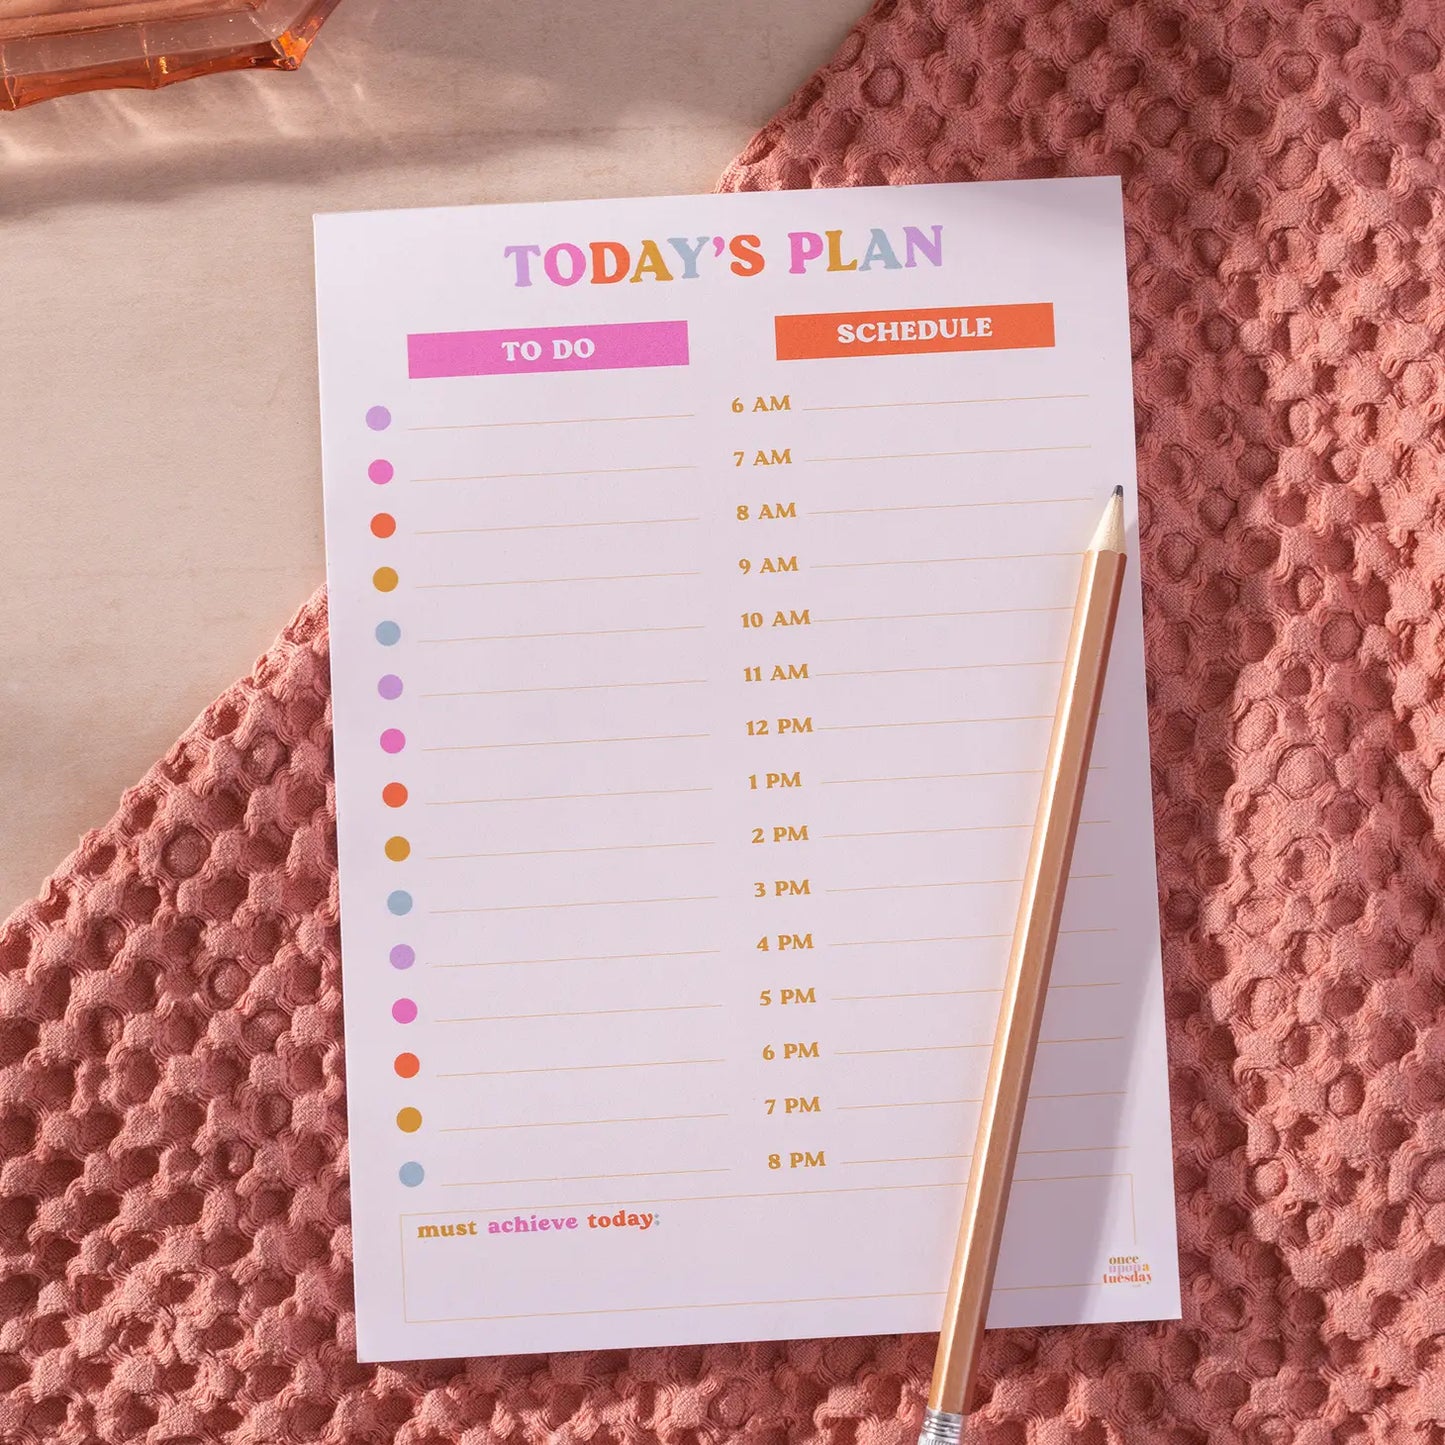 Daily Planner Pad | You Got This | Recycled Paper